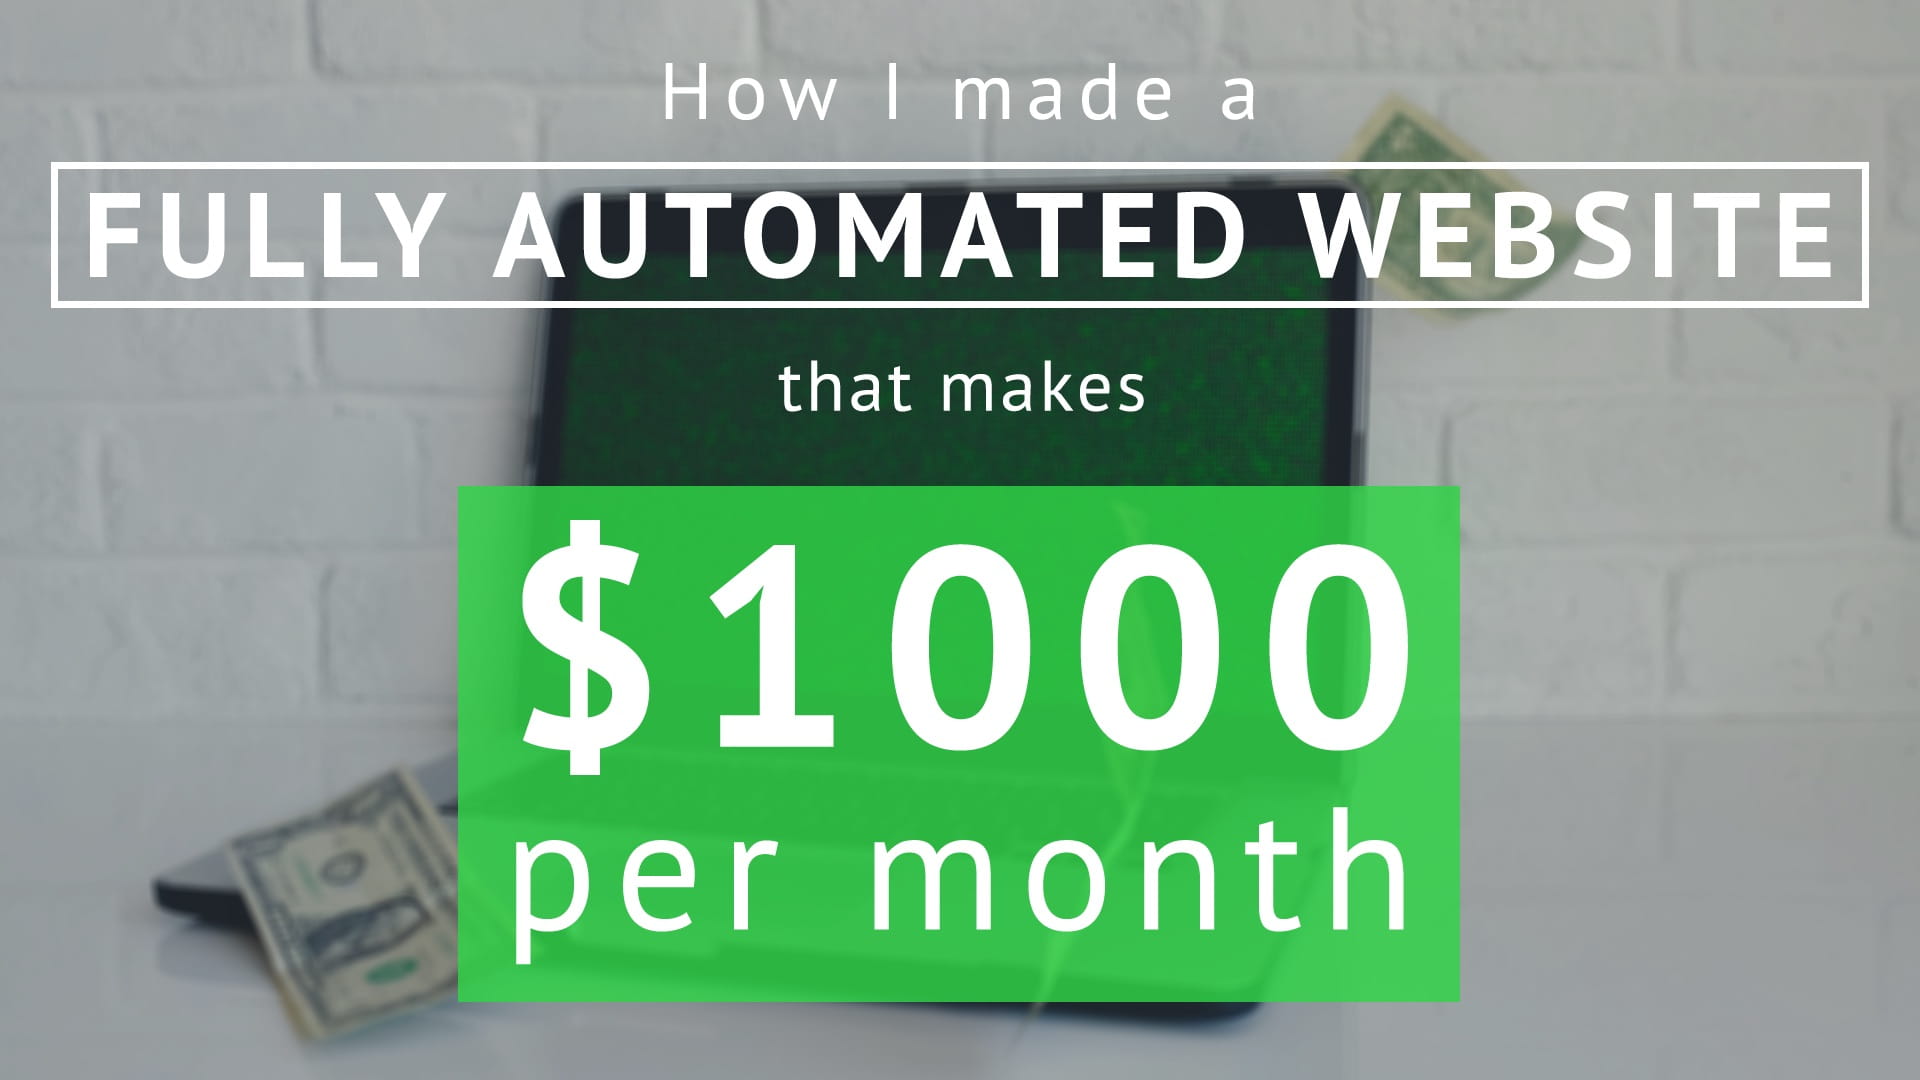 How I made a fully automated website that makes $1000 per month